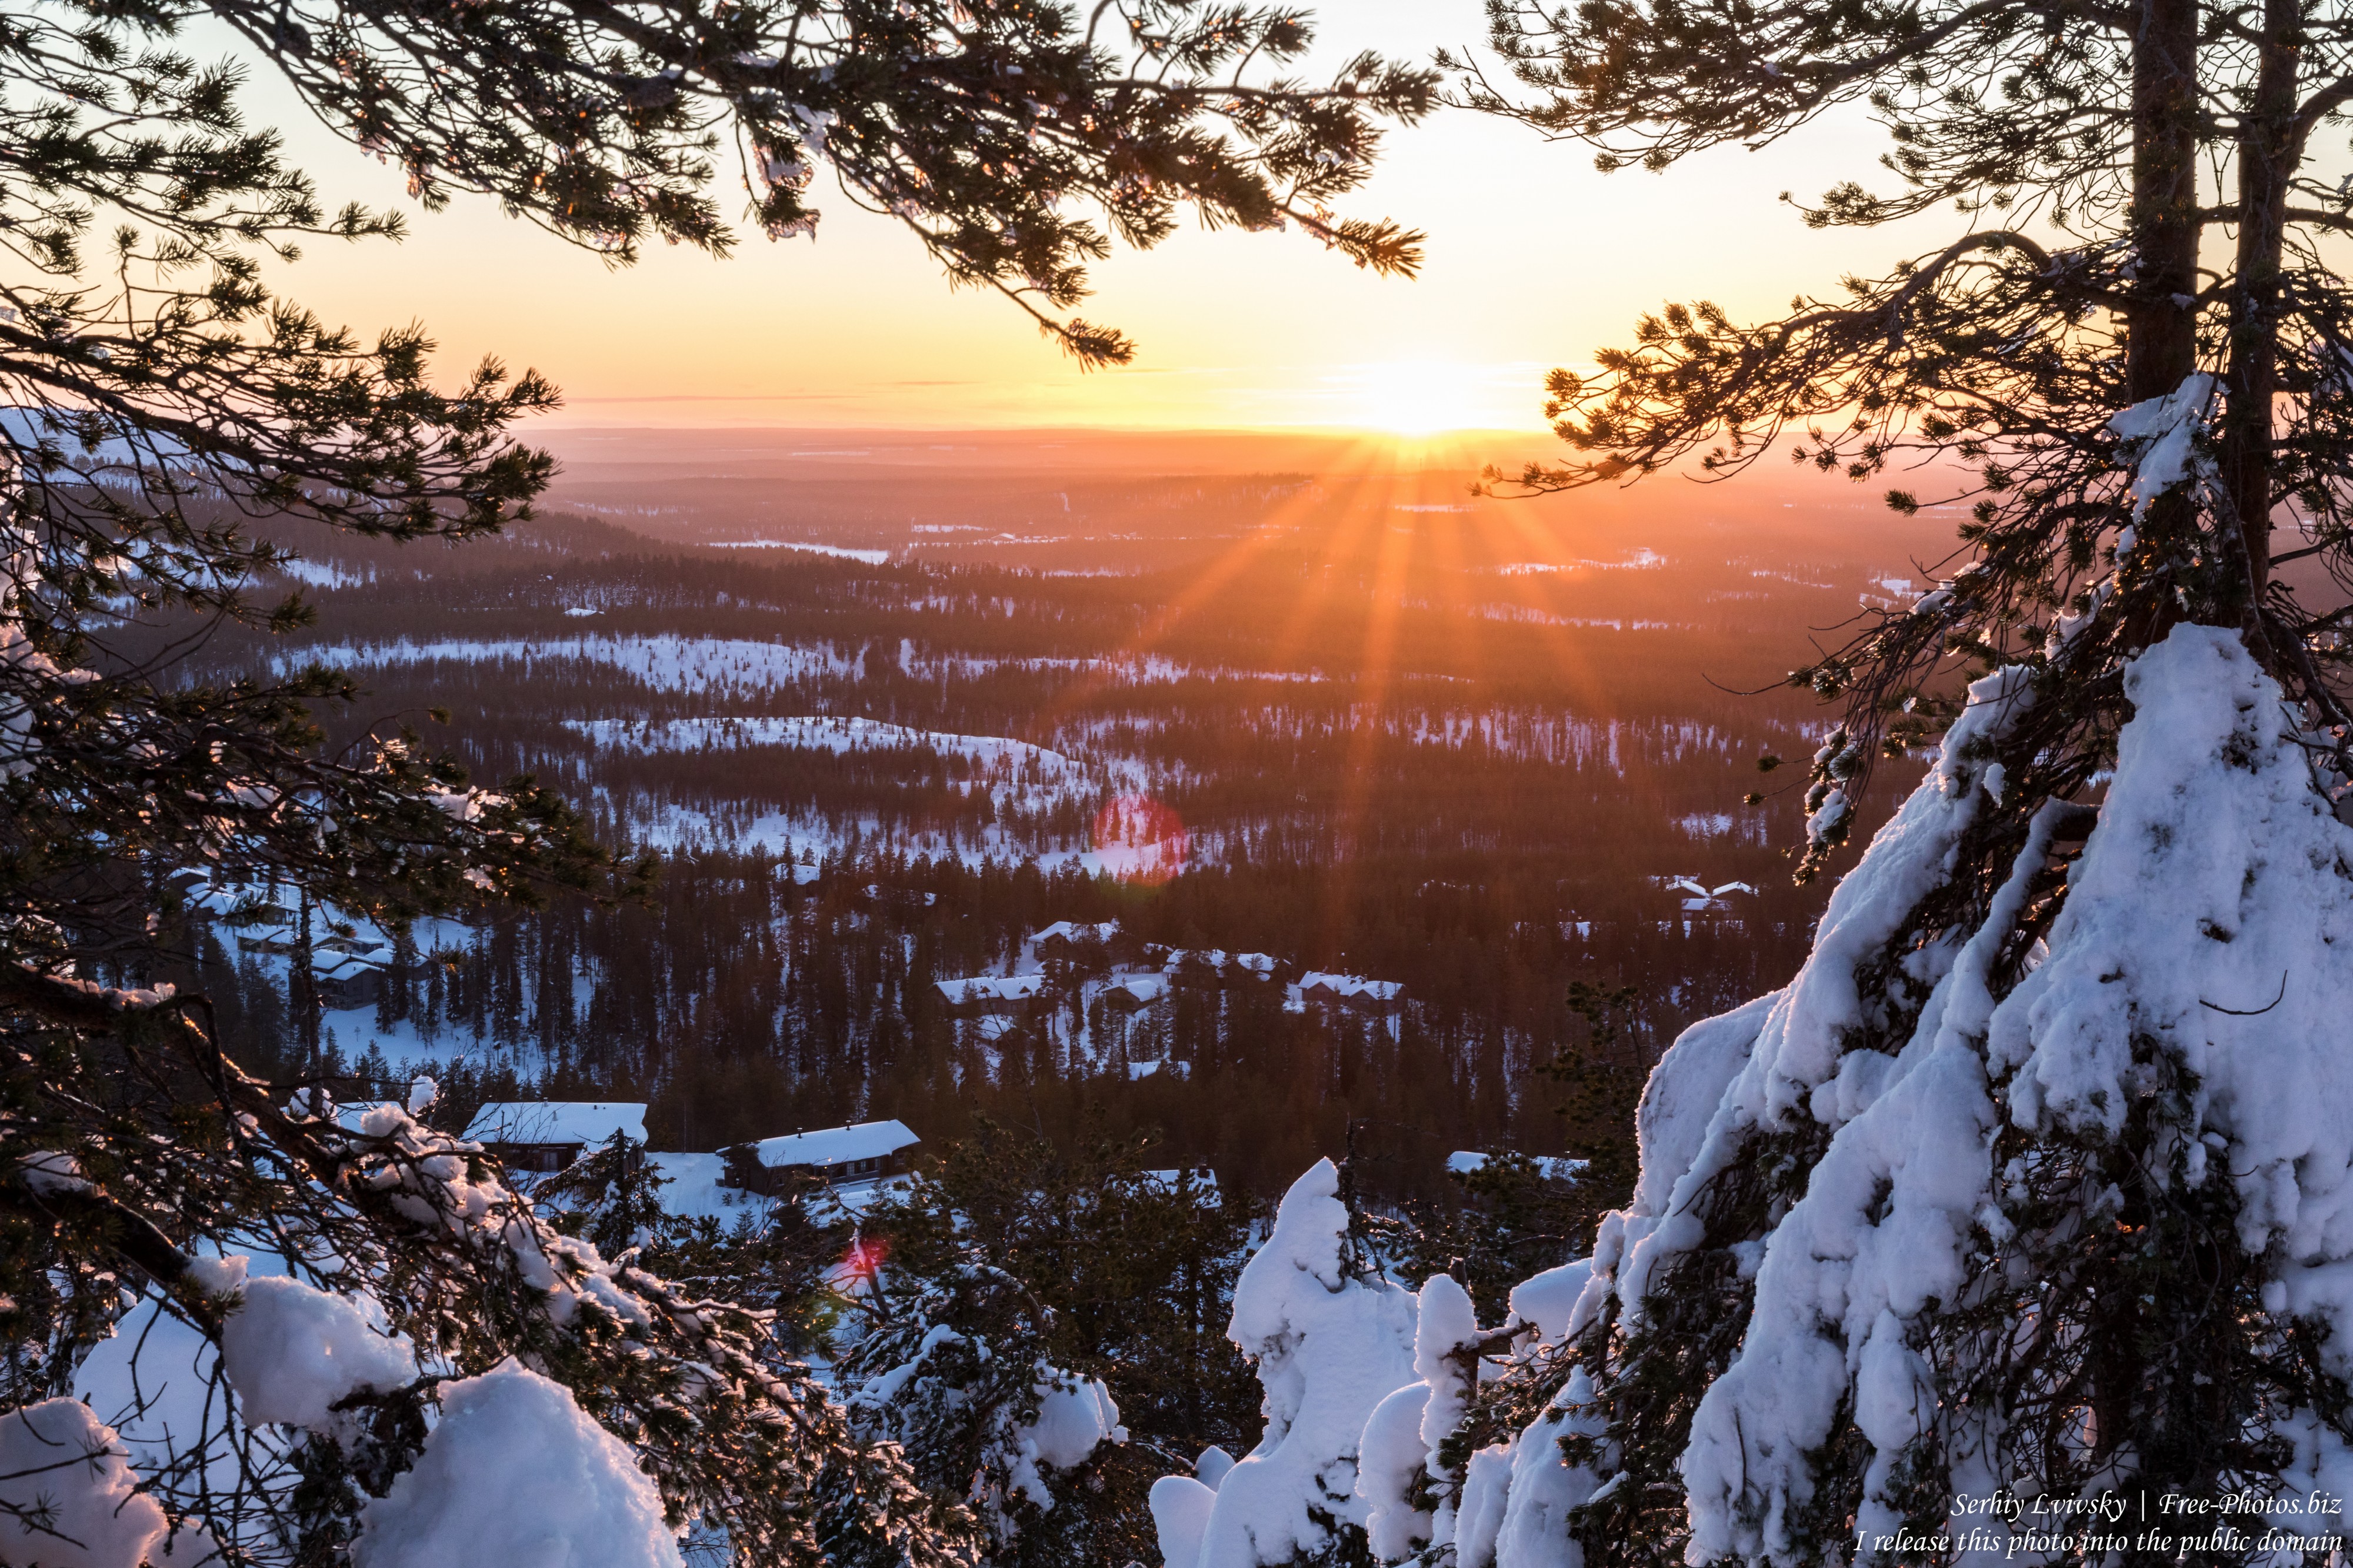 Ruka, Finland, photographed in January 2020 by Serhiy Lvivsky, picture 5